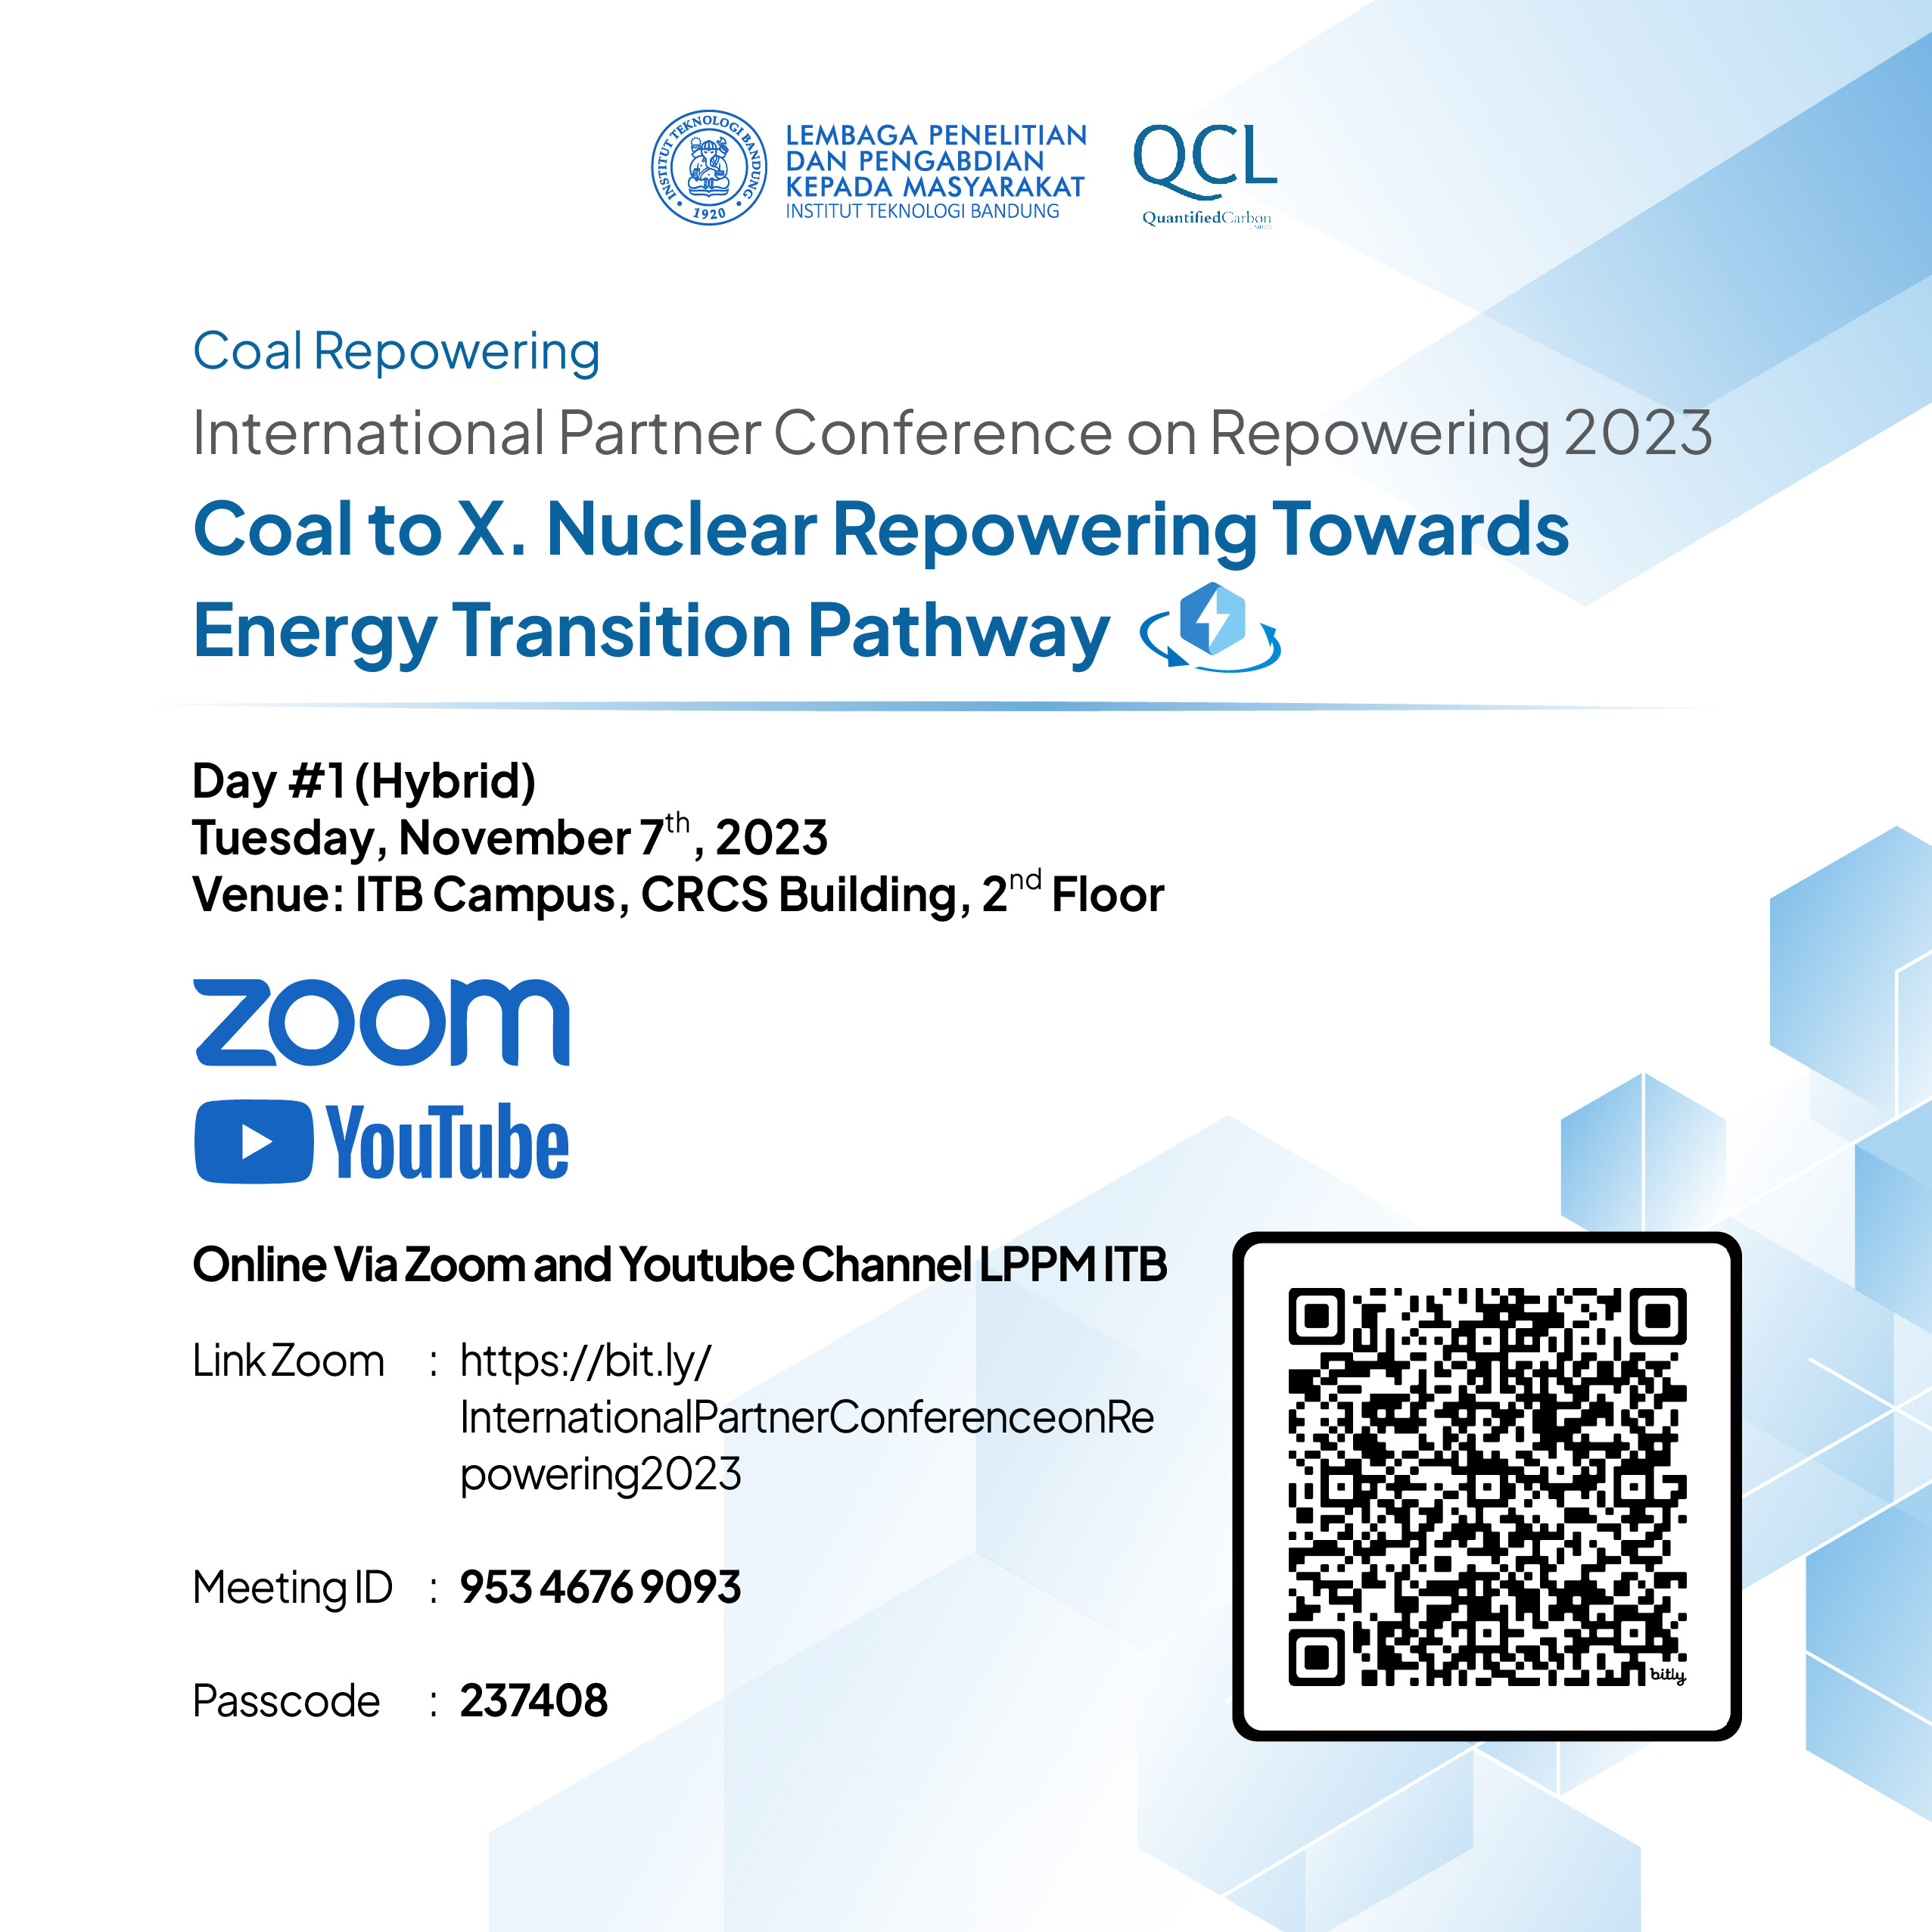 Day 1 - International Partner Conference on Repowering 2023